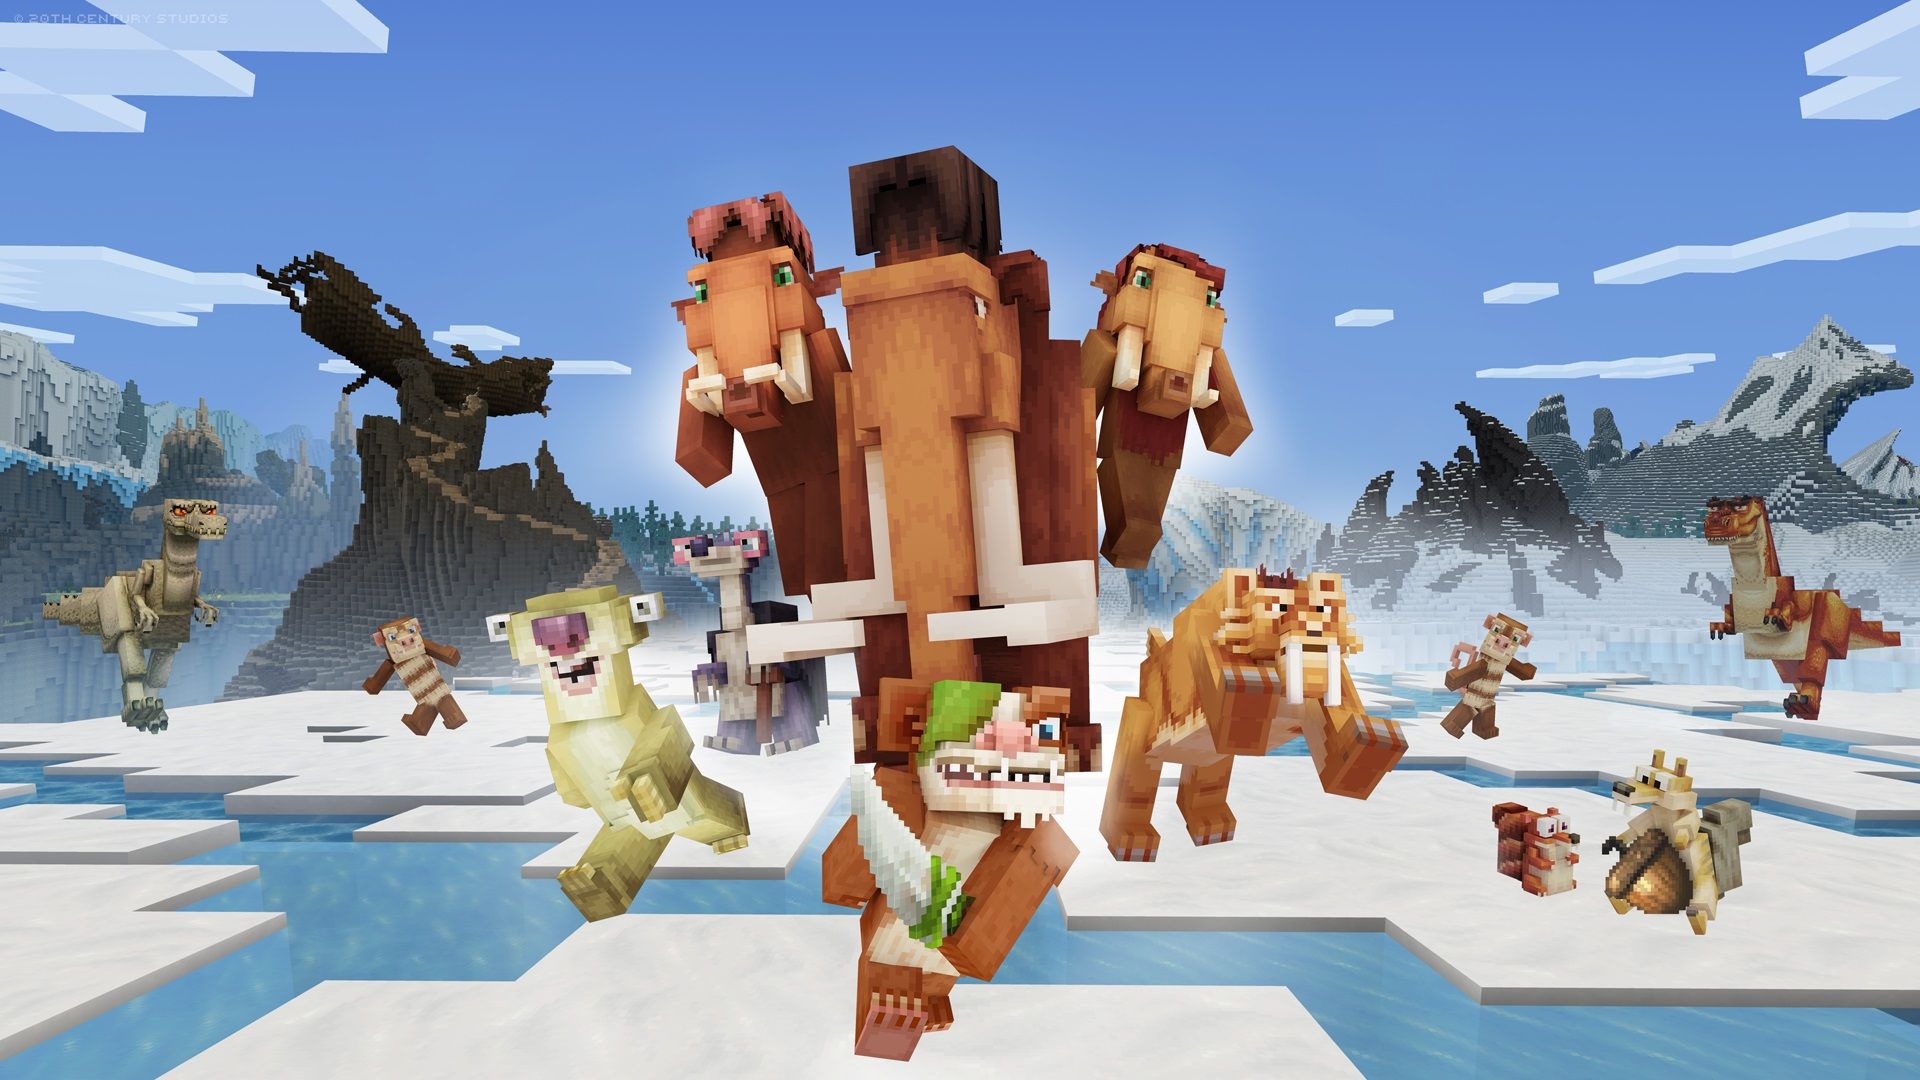 ICE AGE ARRIVES IN THE OVERWORLD